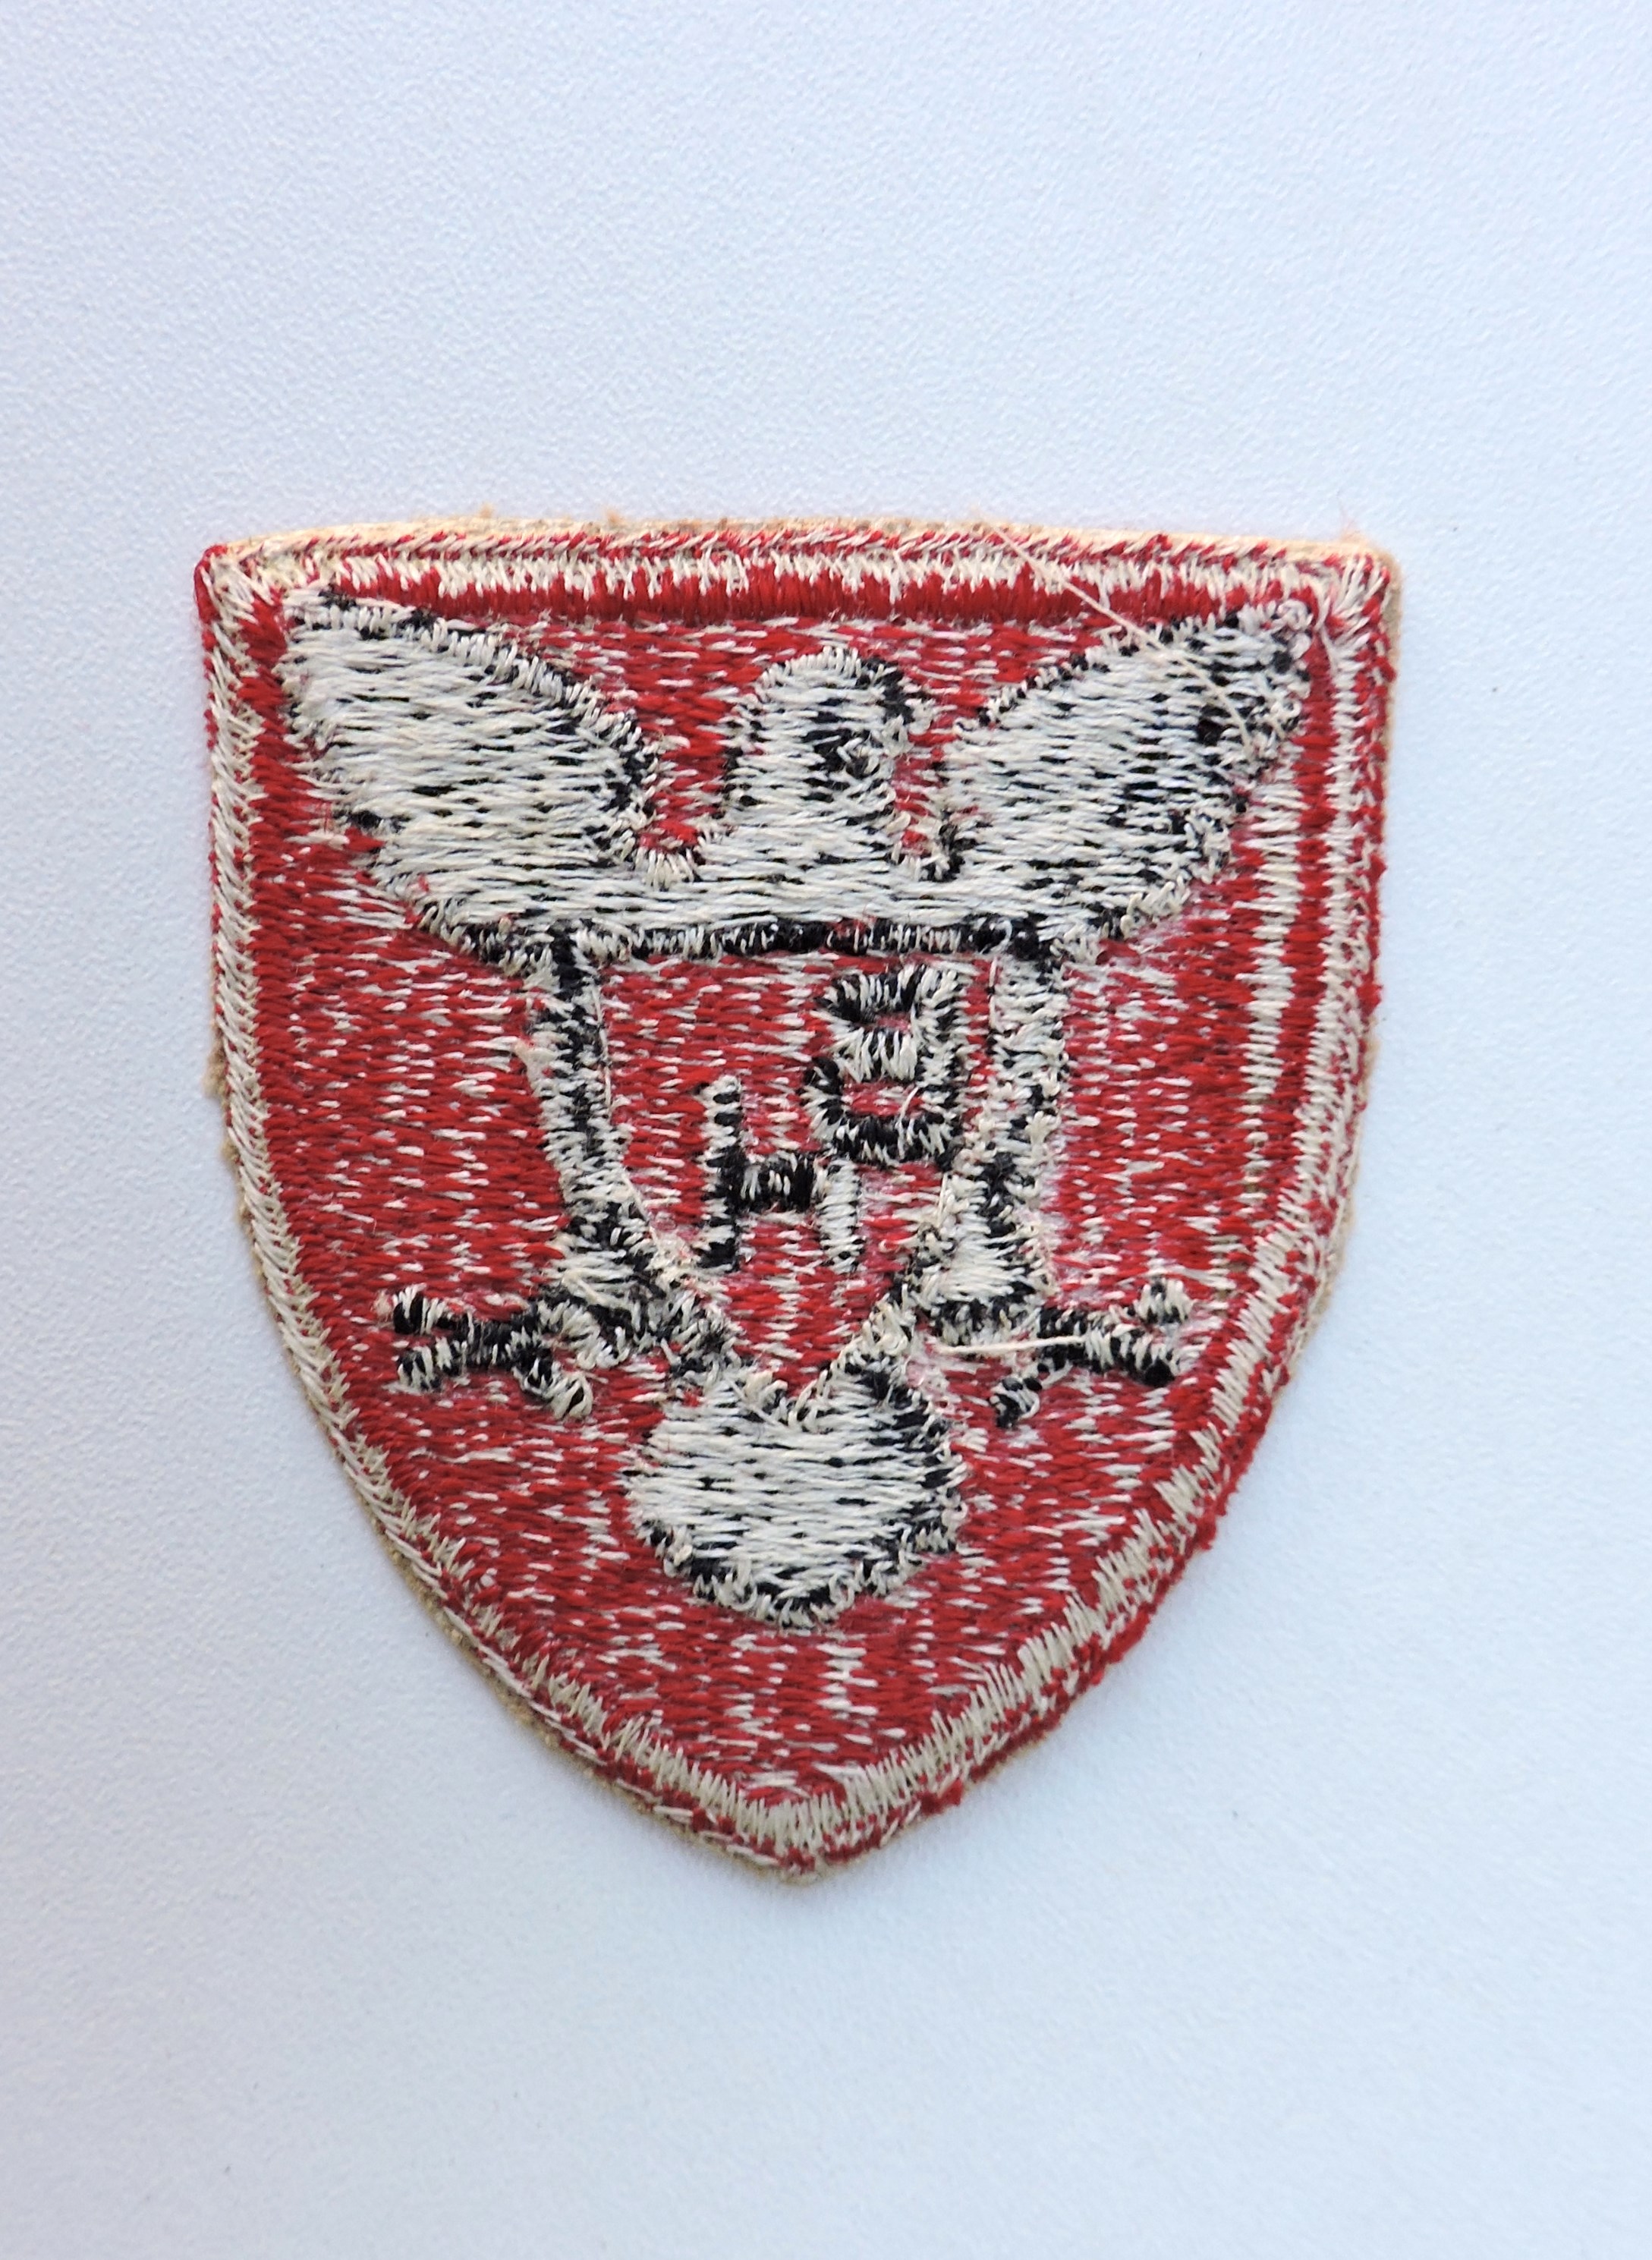 Patch US  86th infantry division